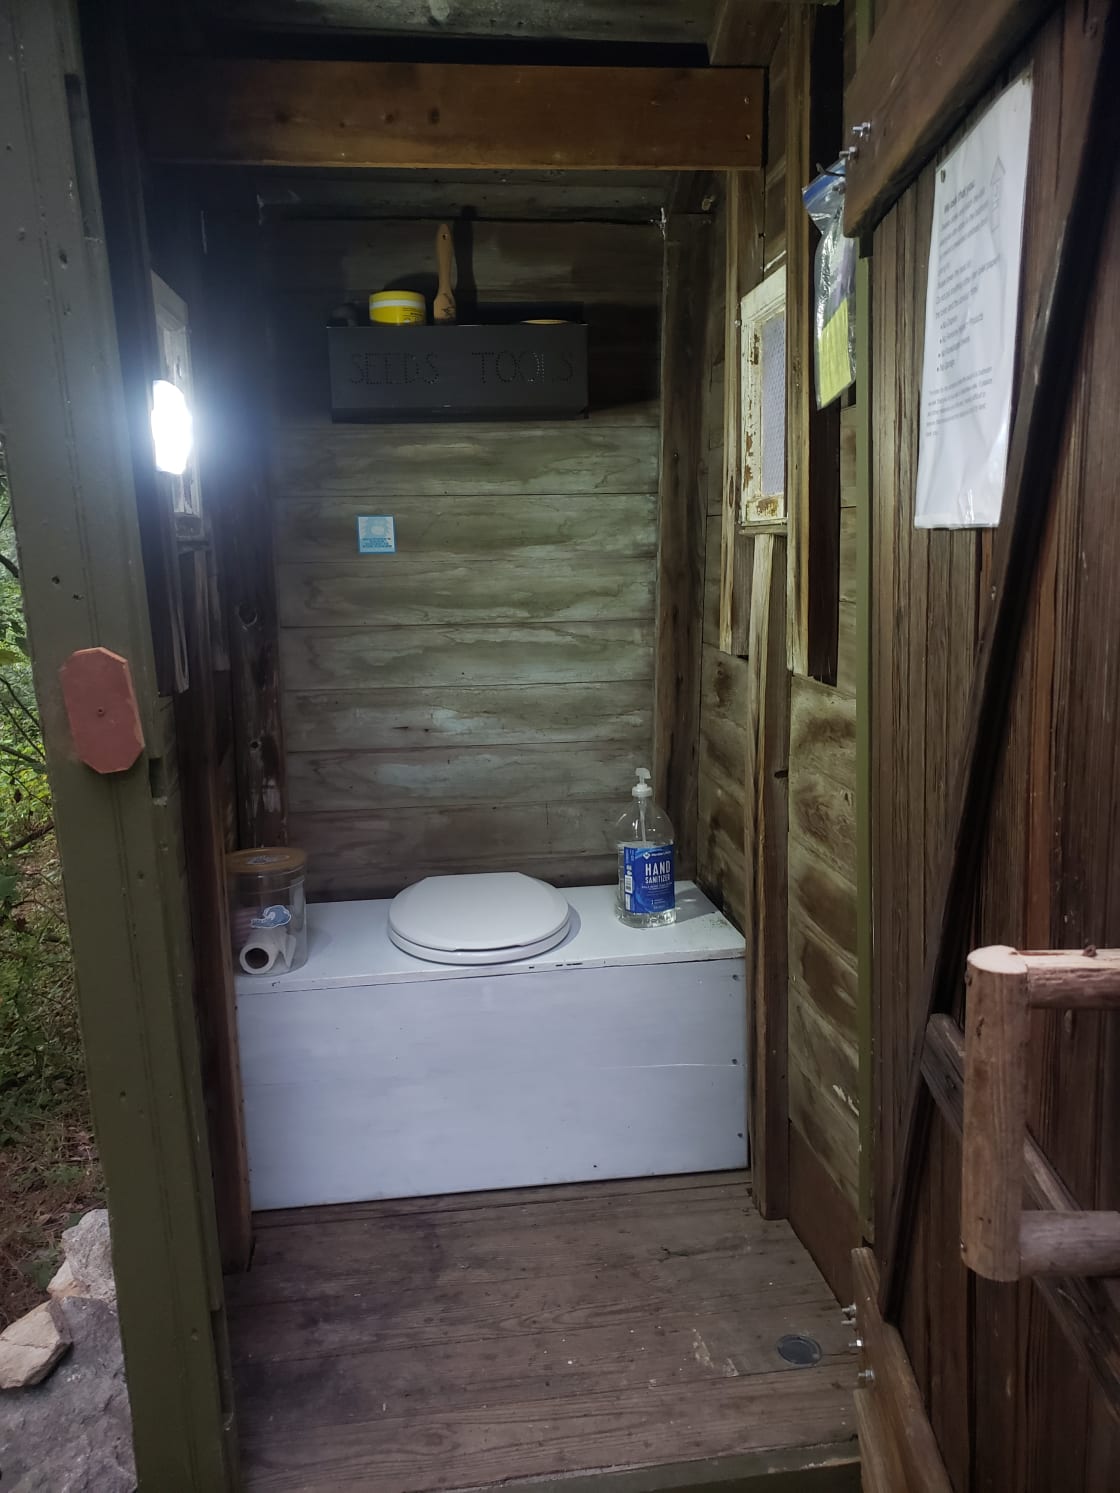 Nice and clean, we do provide toilet paper and clean the privy between campers. Also has a light and brocheures of things in the area.